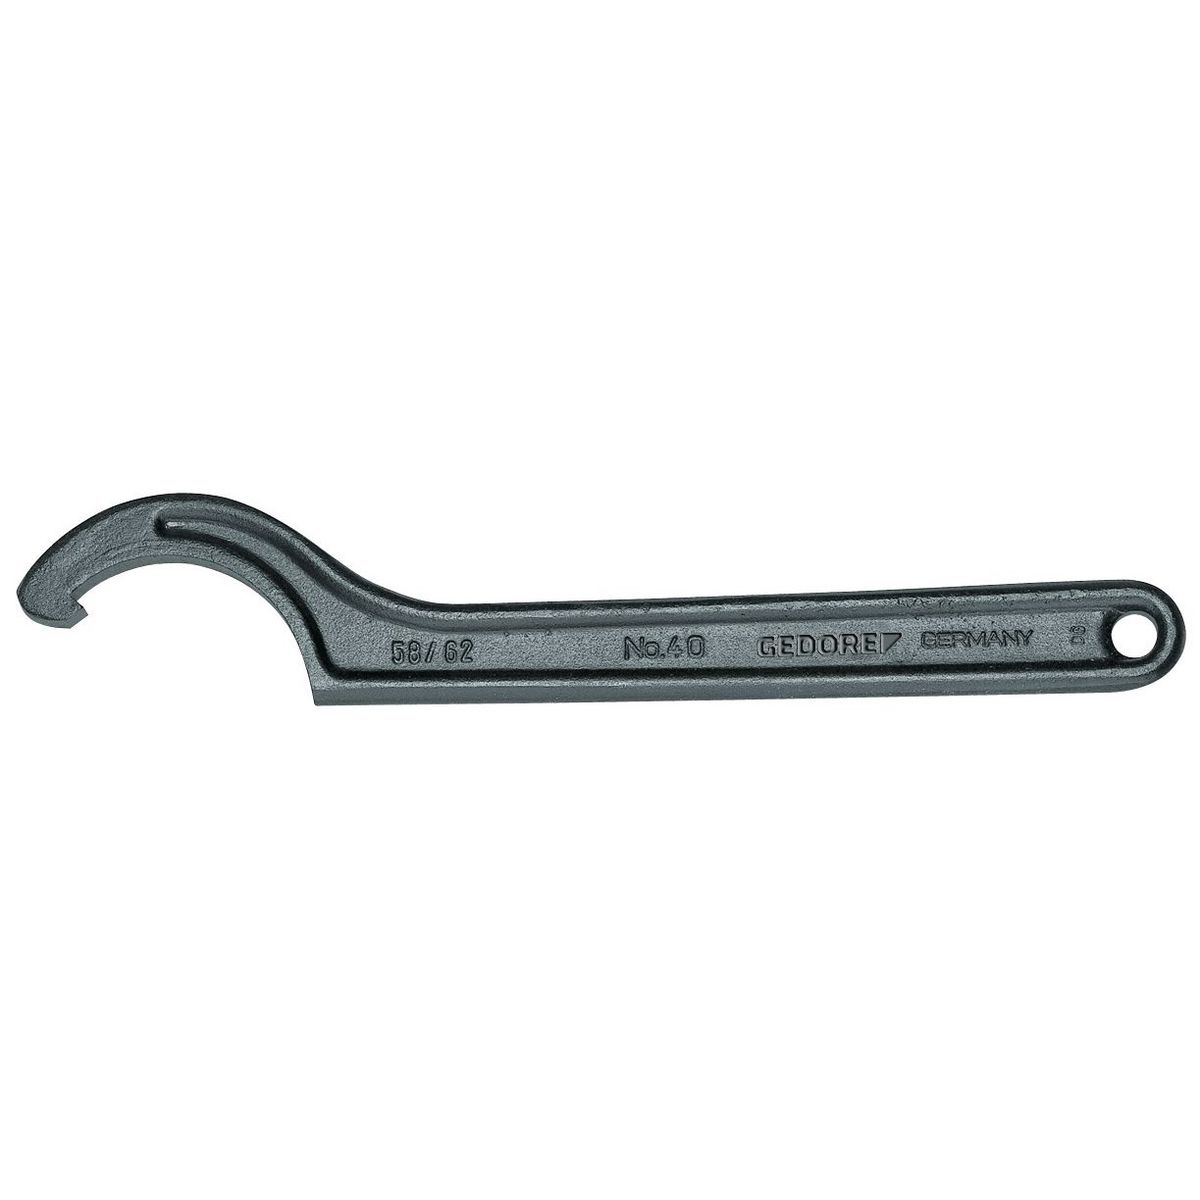 Hook wrench with lug, 80-90mm No.40 80-90 Gedore